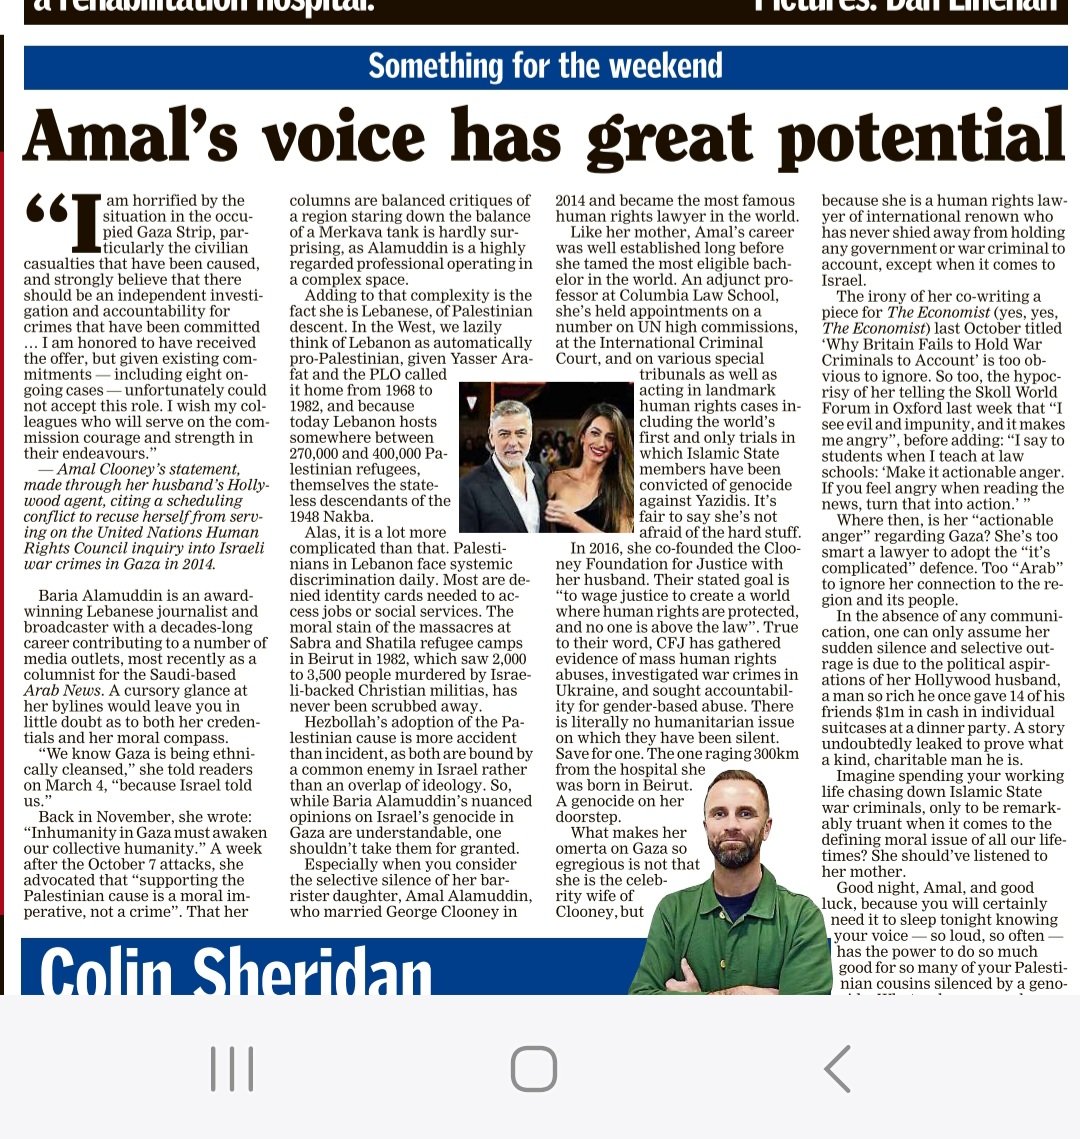 Today in @irishexaminer, some words on the selective silence of Amal Clooney, champion of human rights, unless, of course, those humans are Palestinian